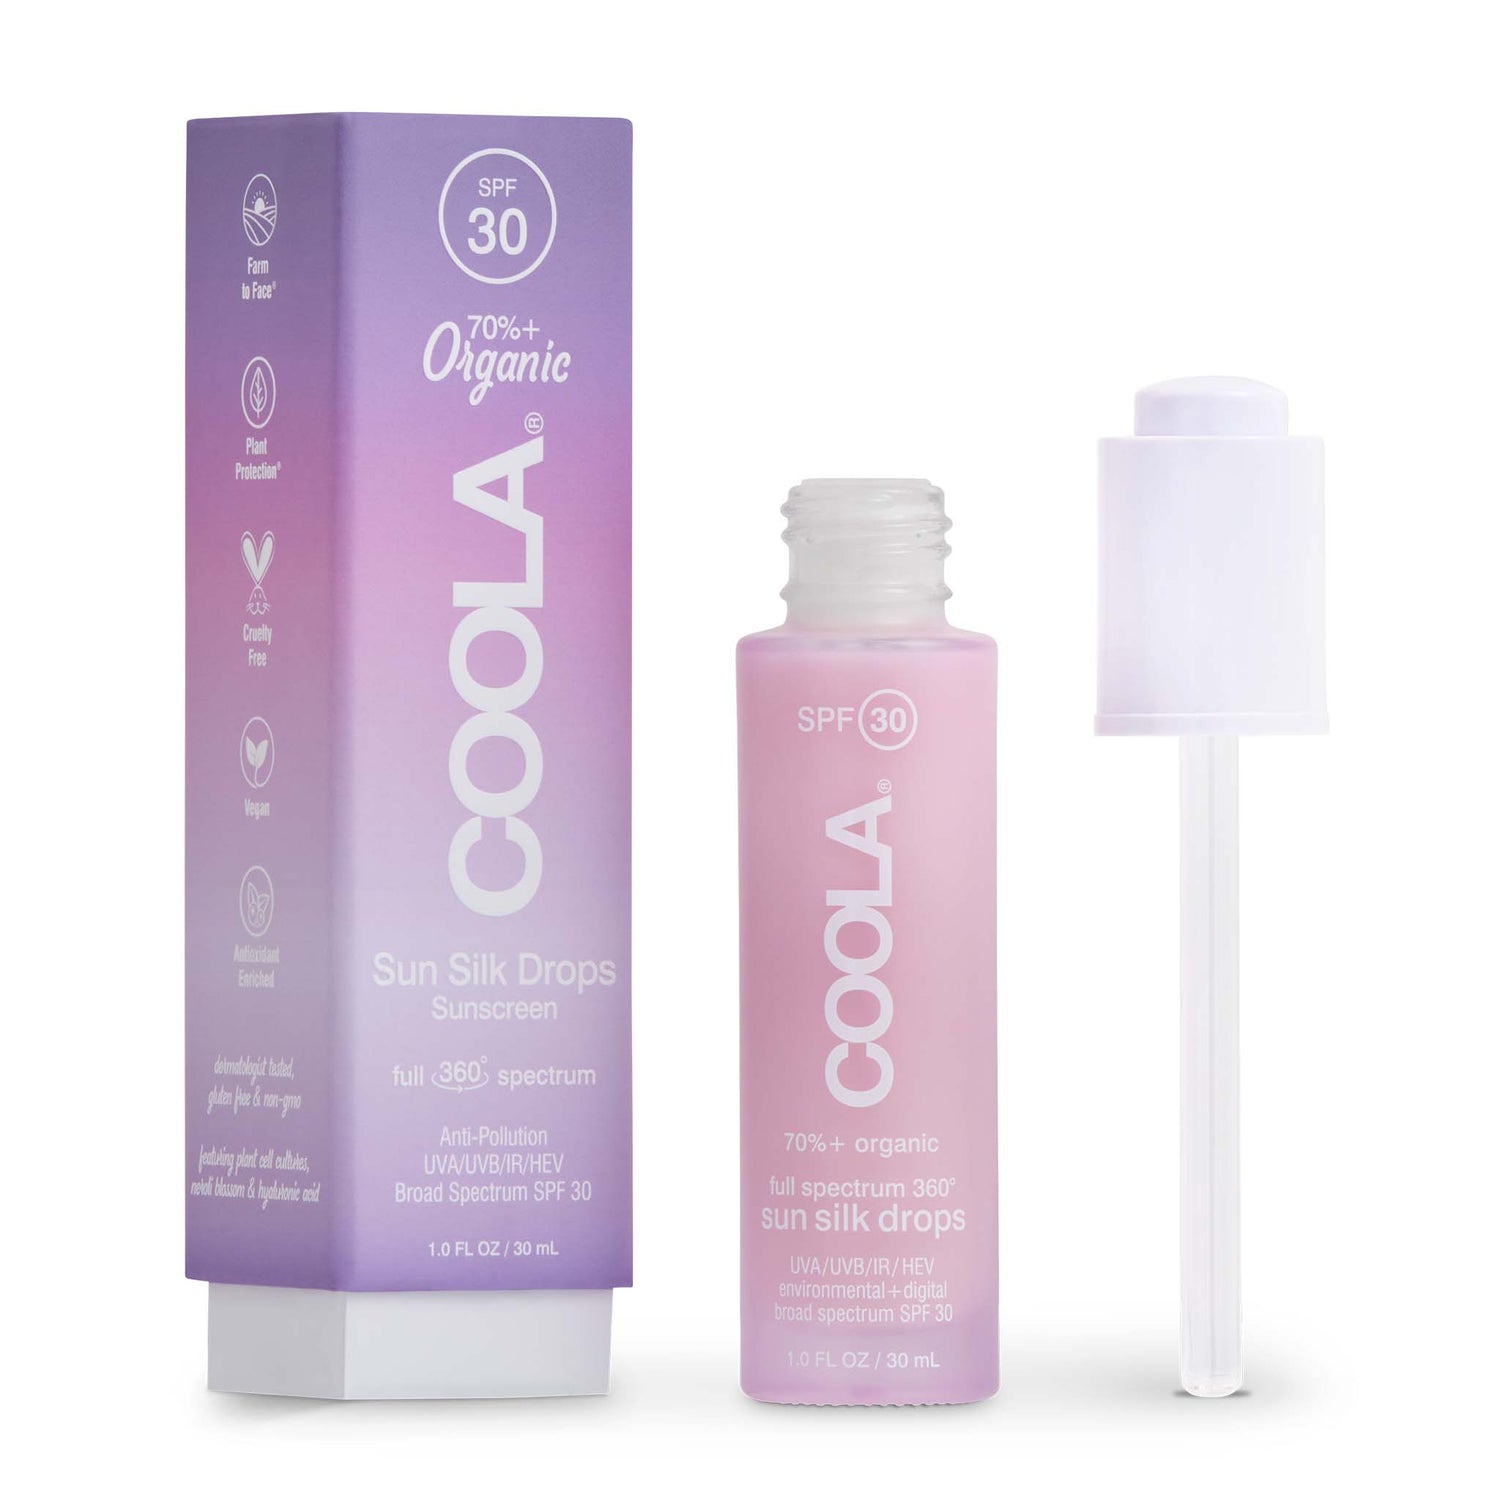 Coola face spf 30 is a full spectrum sunscreen that protects not just from sun rays but from blue light on your electronic devices. 